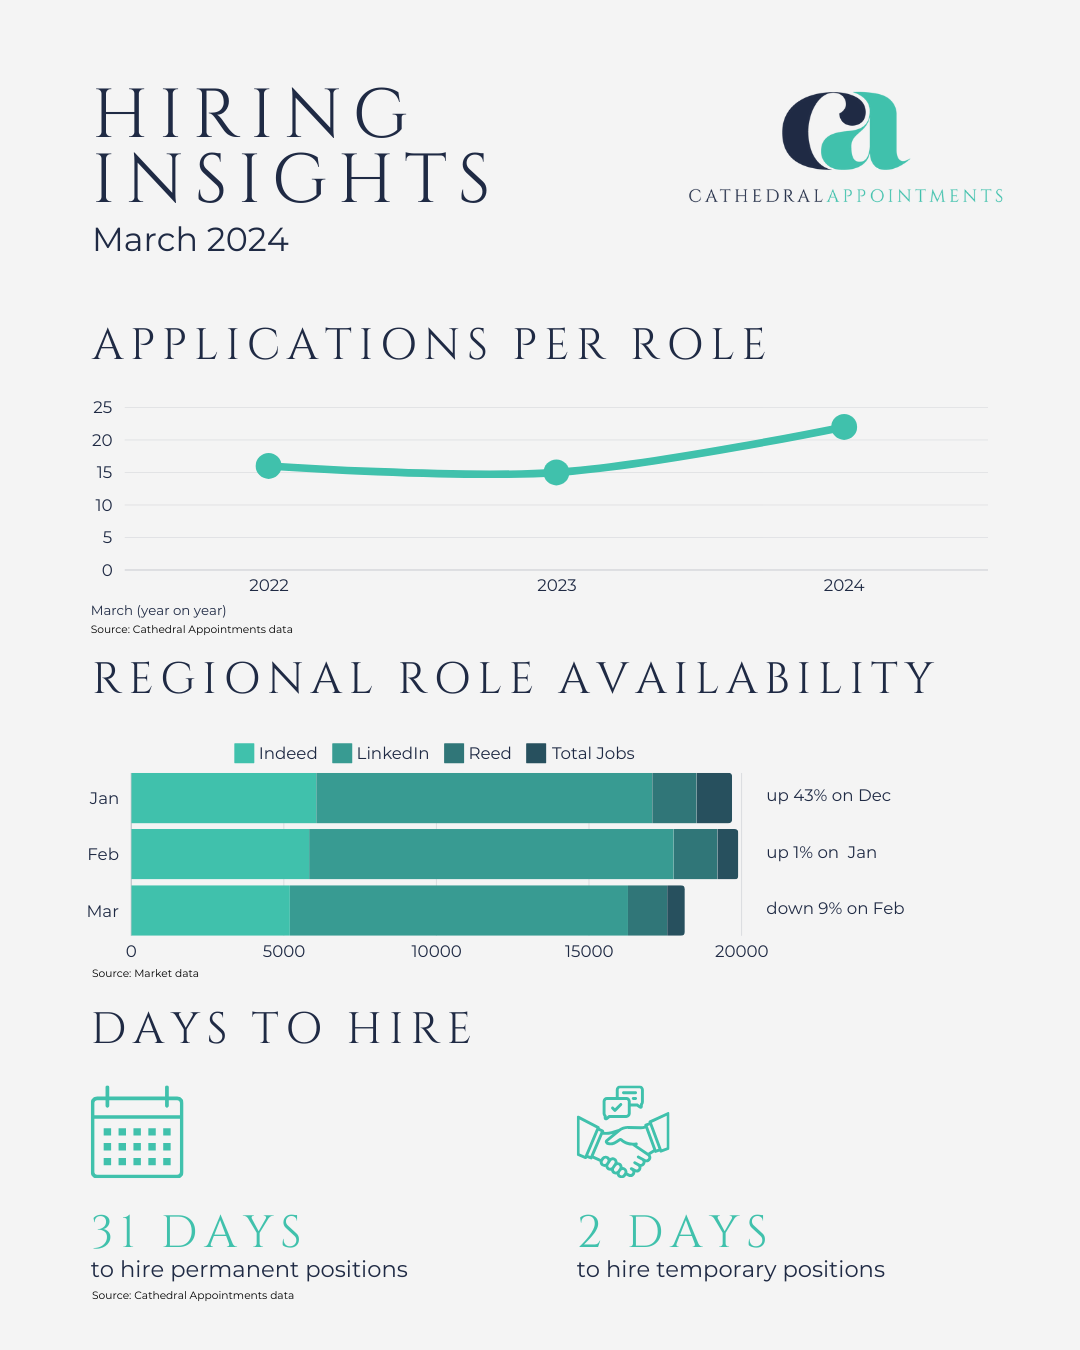 Hiring insights March 2024